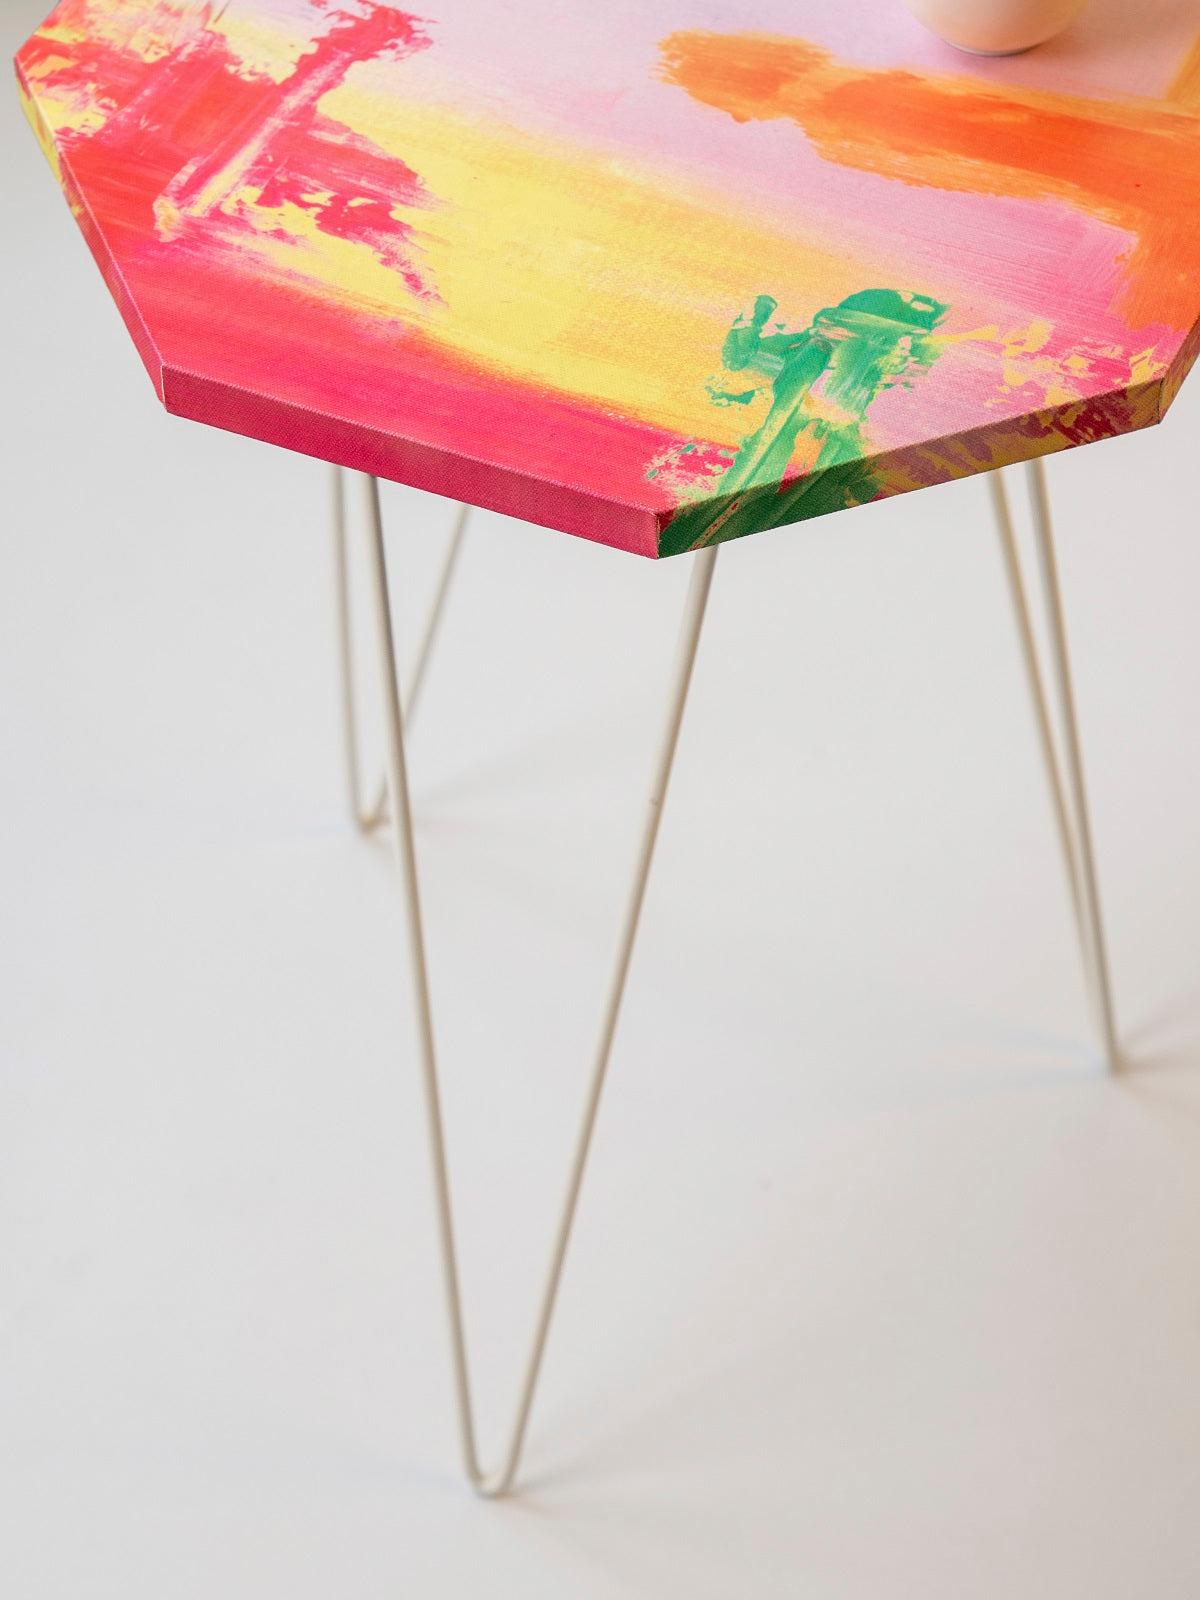 Neon Octagon Side Tables with Hairpin Legs, Side Tables, Wooden Tables, Living Room Decor by A Tiny Mistake